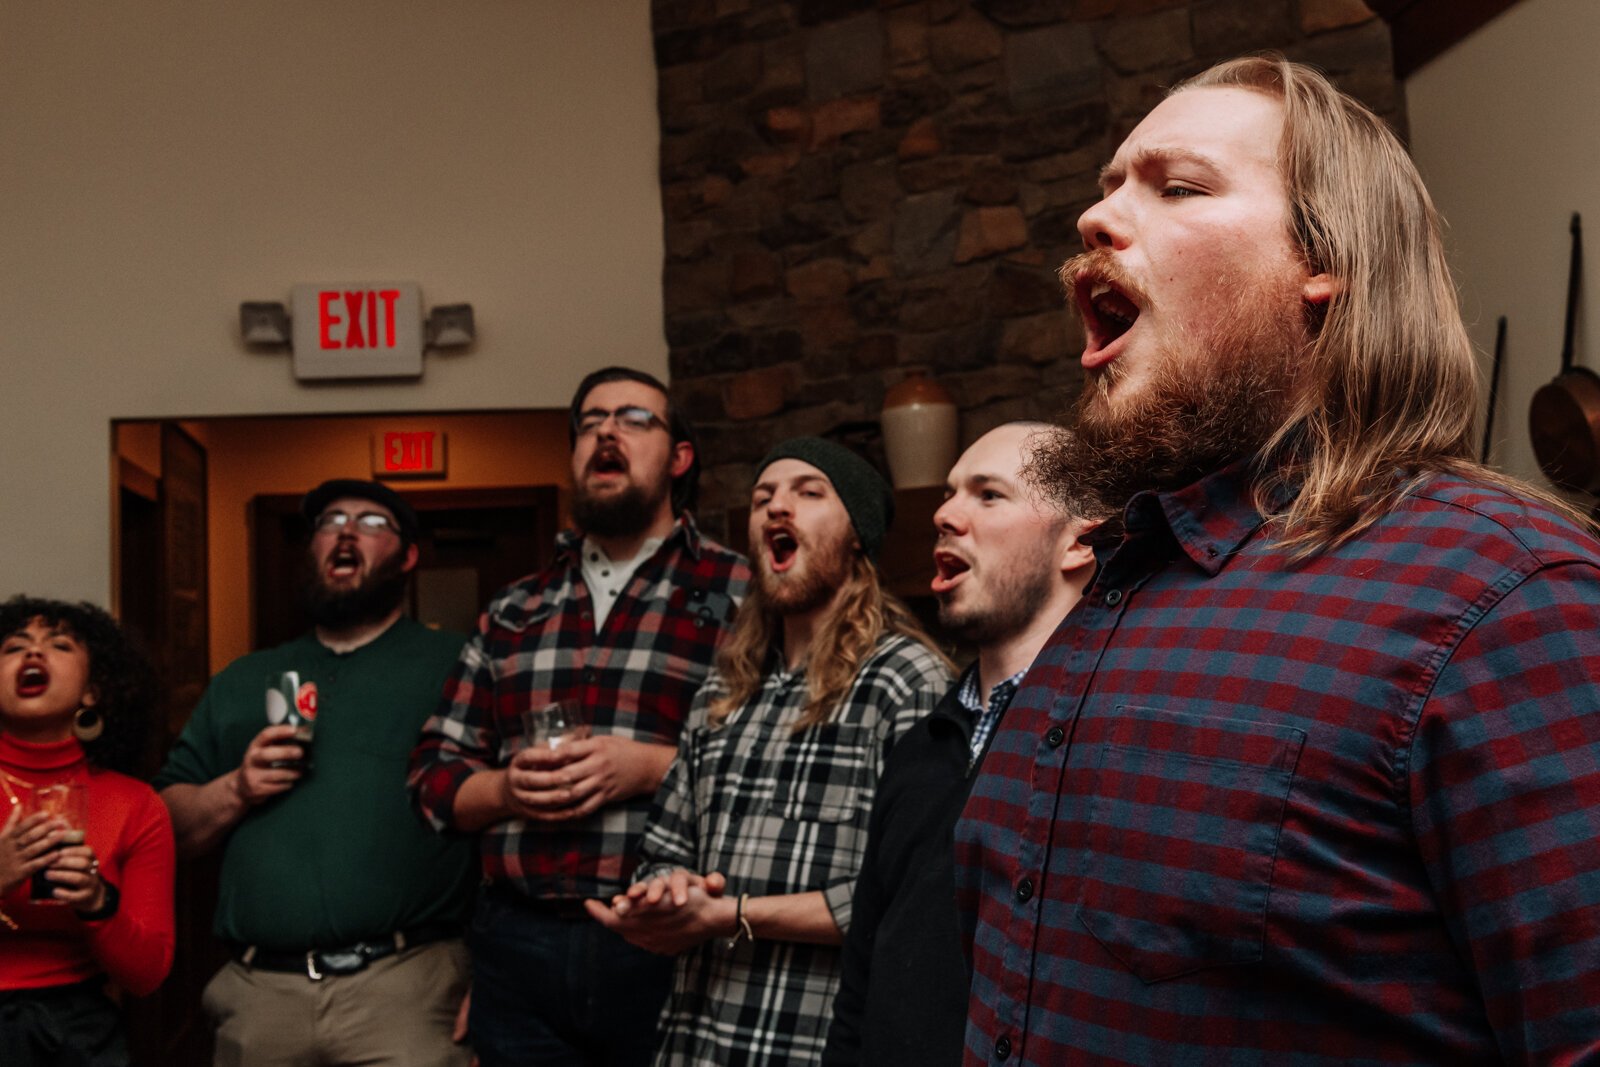 Members of the Ragtag Bunch sing during a performance at J.K. O’ Donnell’s on February 24, 2022.